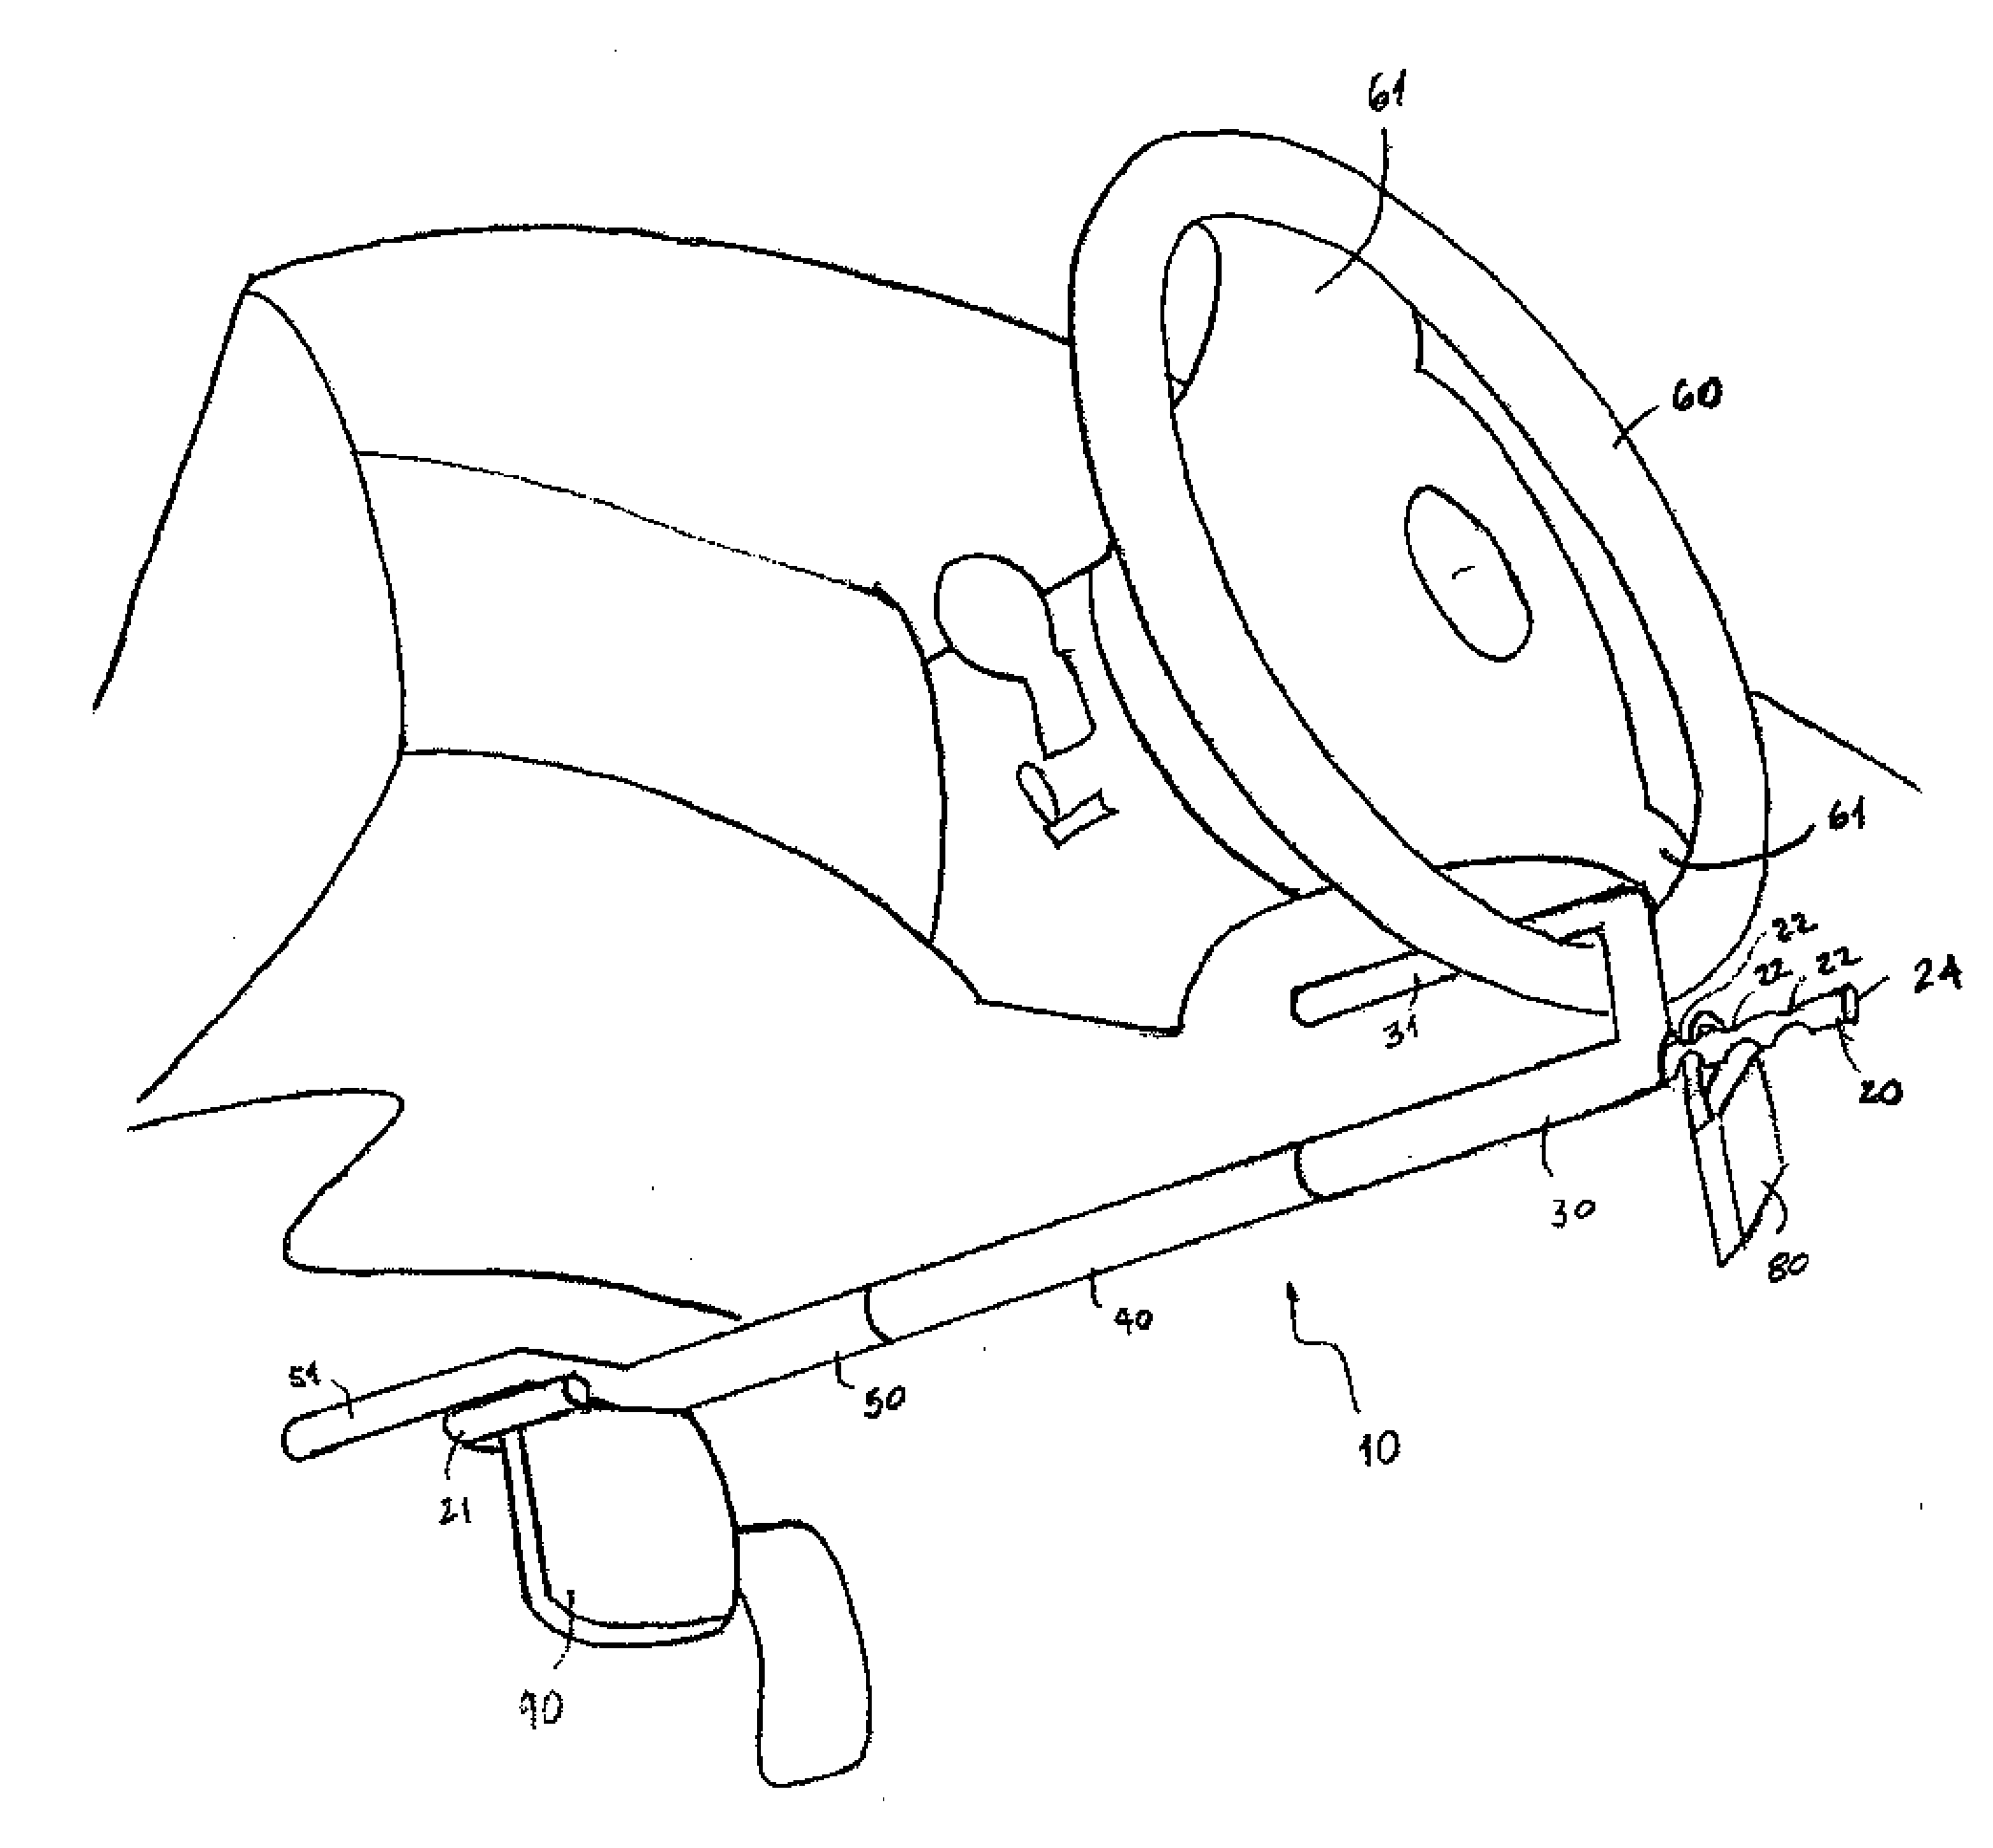 Automobile steering wheel and brake pedal locking device